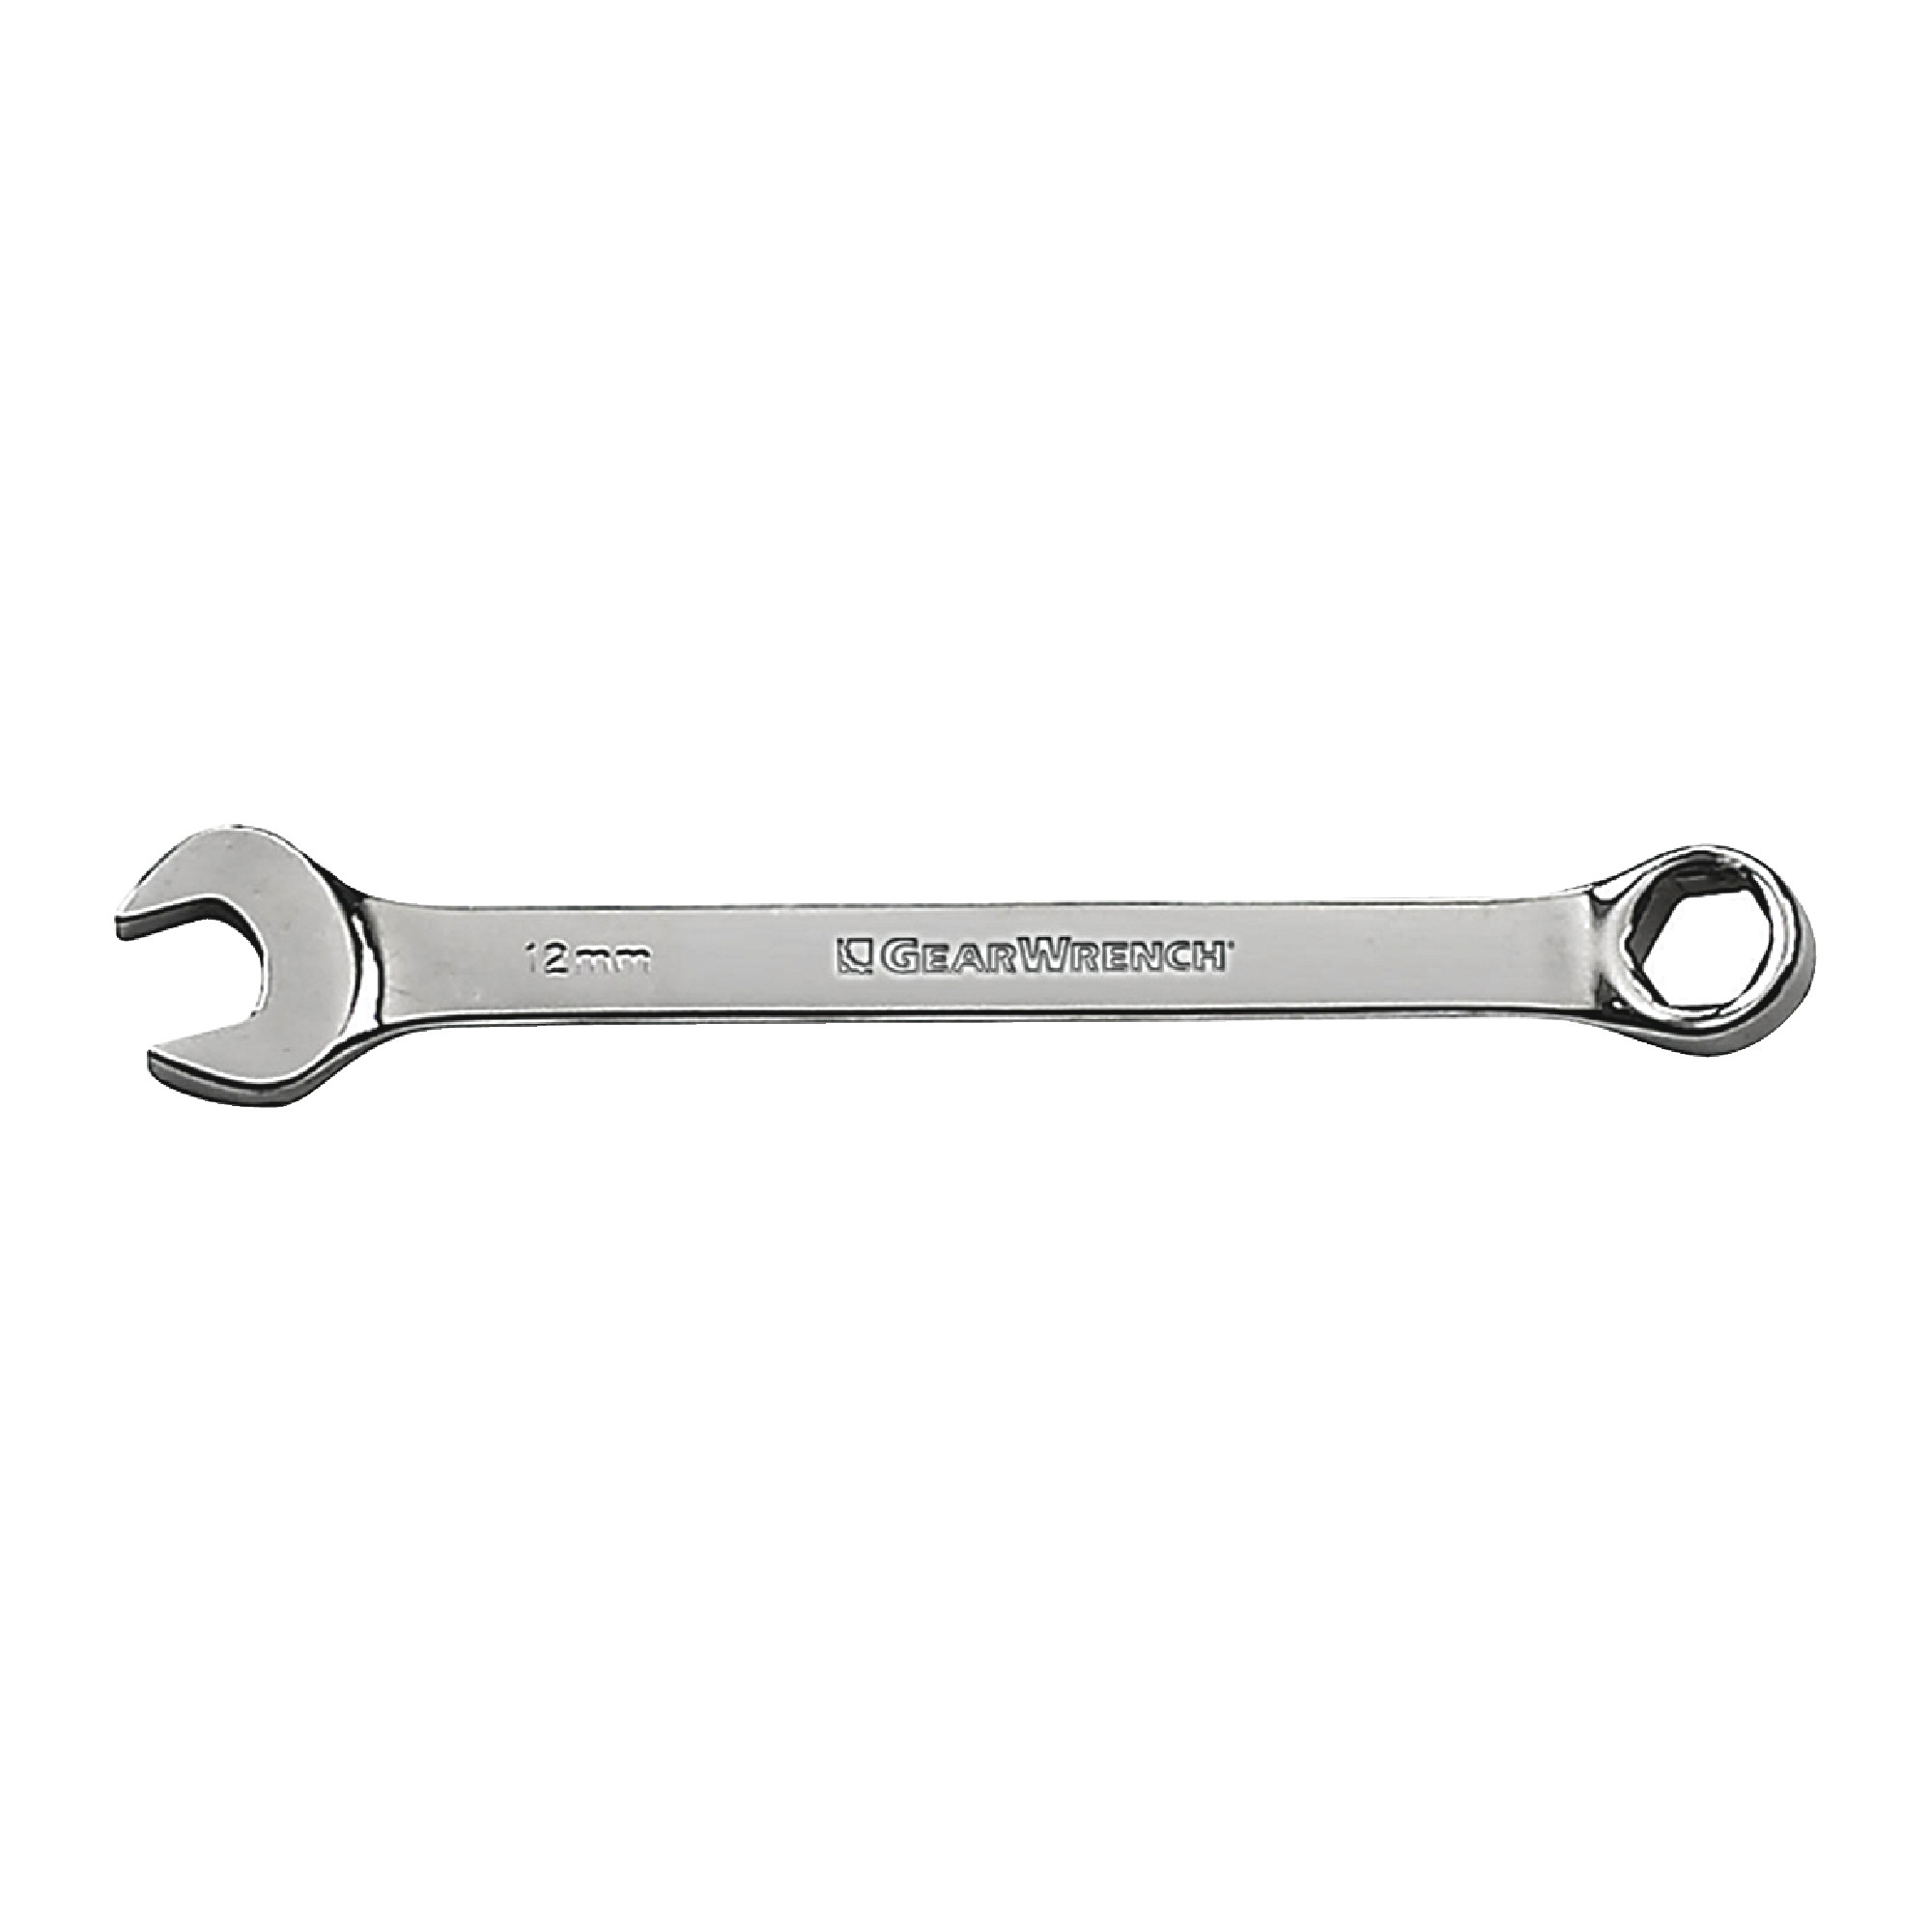 14mm 6 Point Combination Wrench